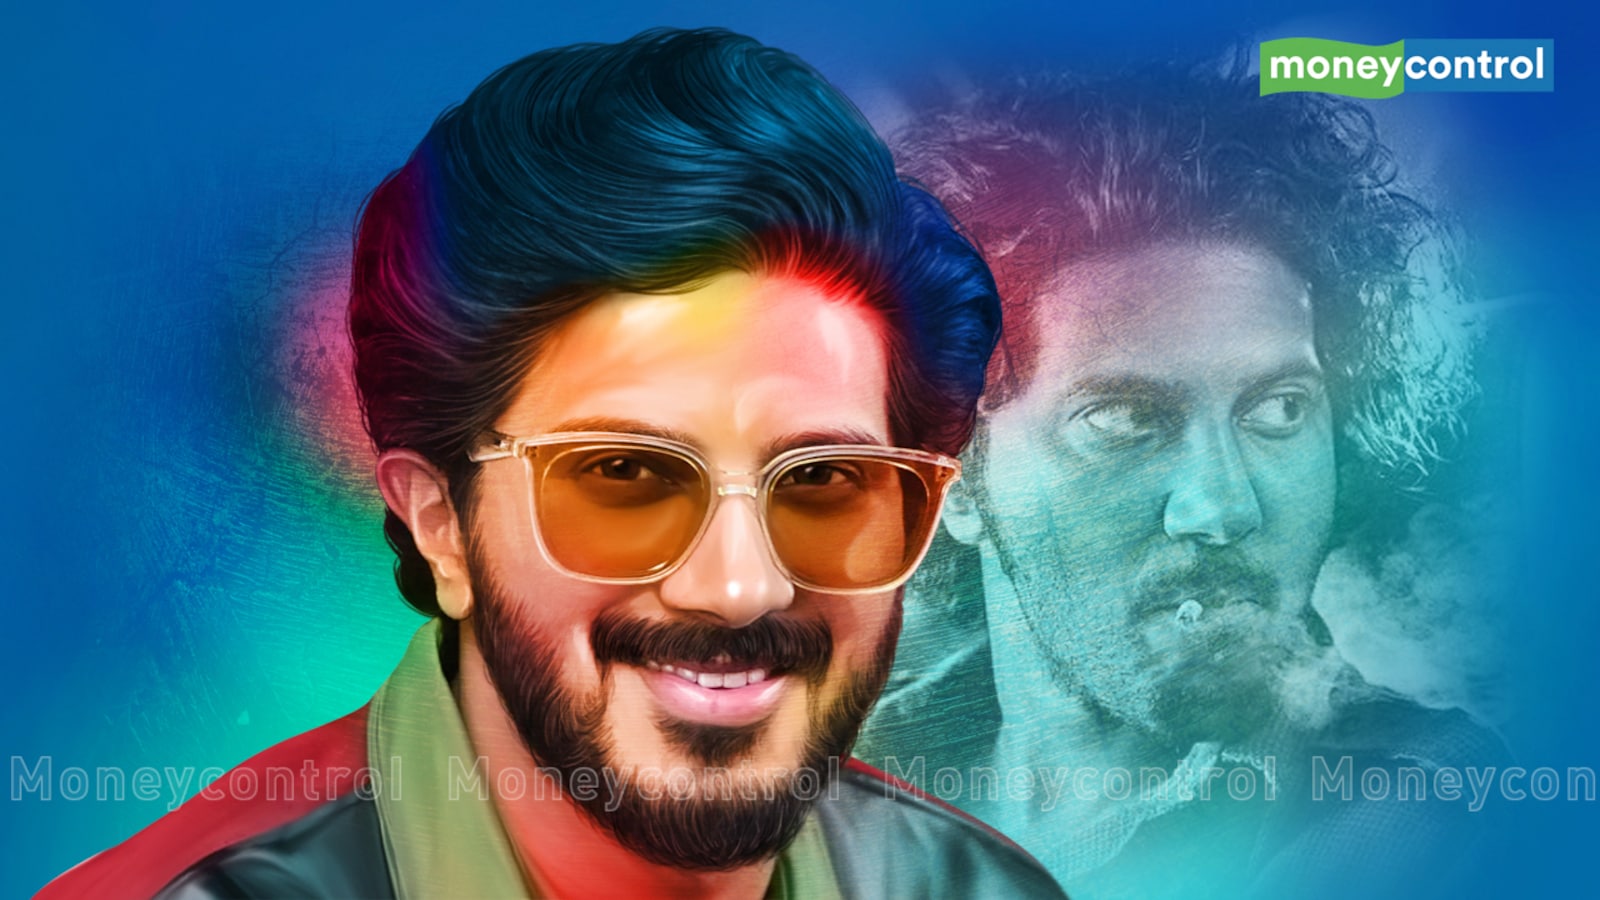 Dulquer Salmaan: The crossover hero, the multilingual star